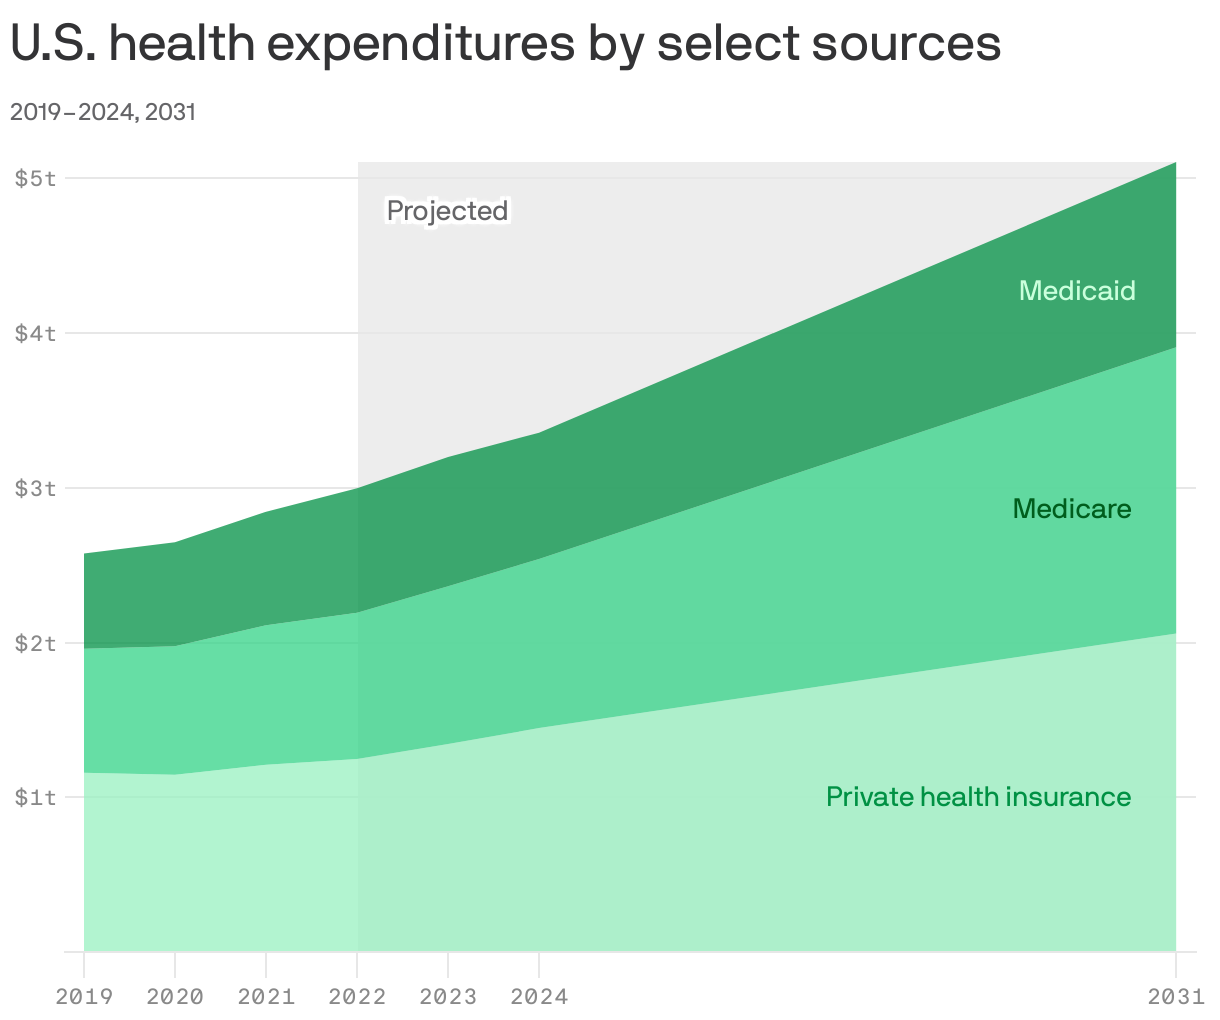 U.S. health expenditures by select sources